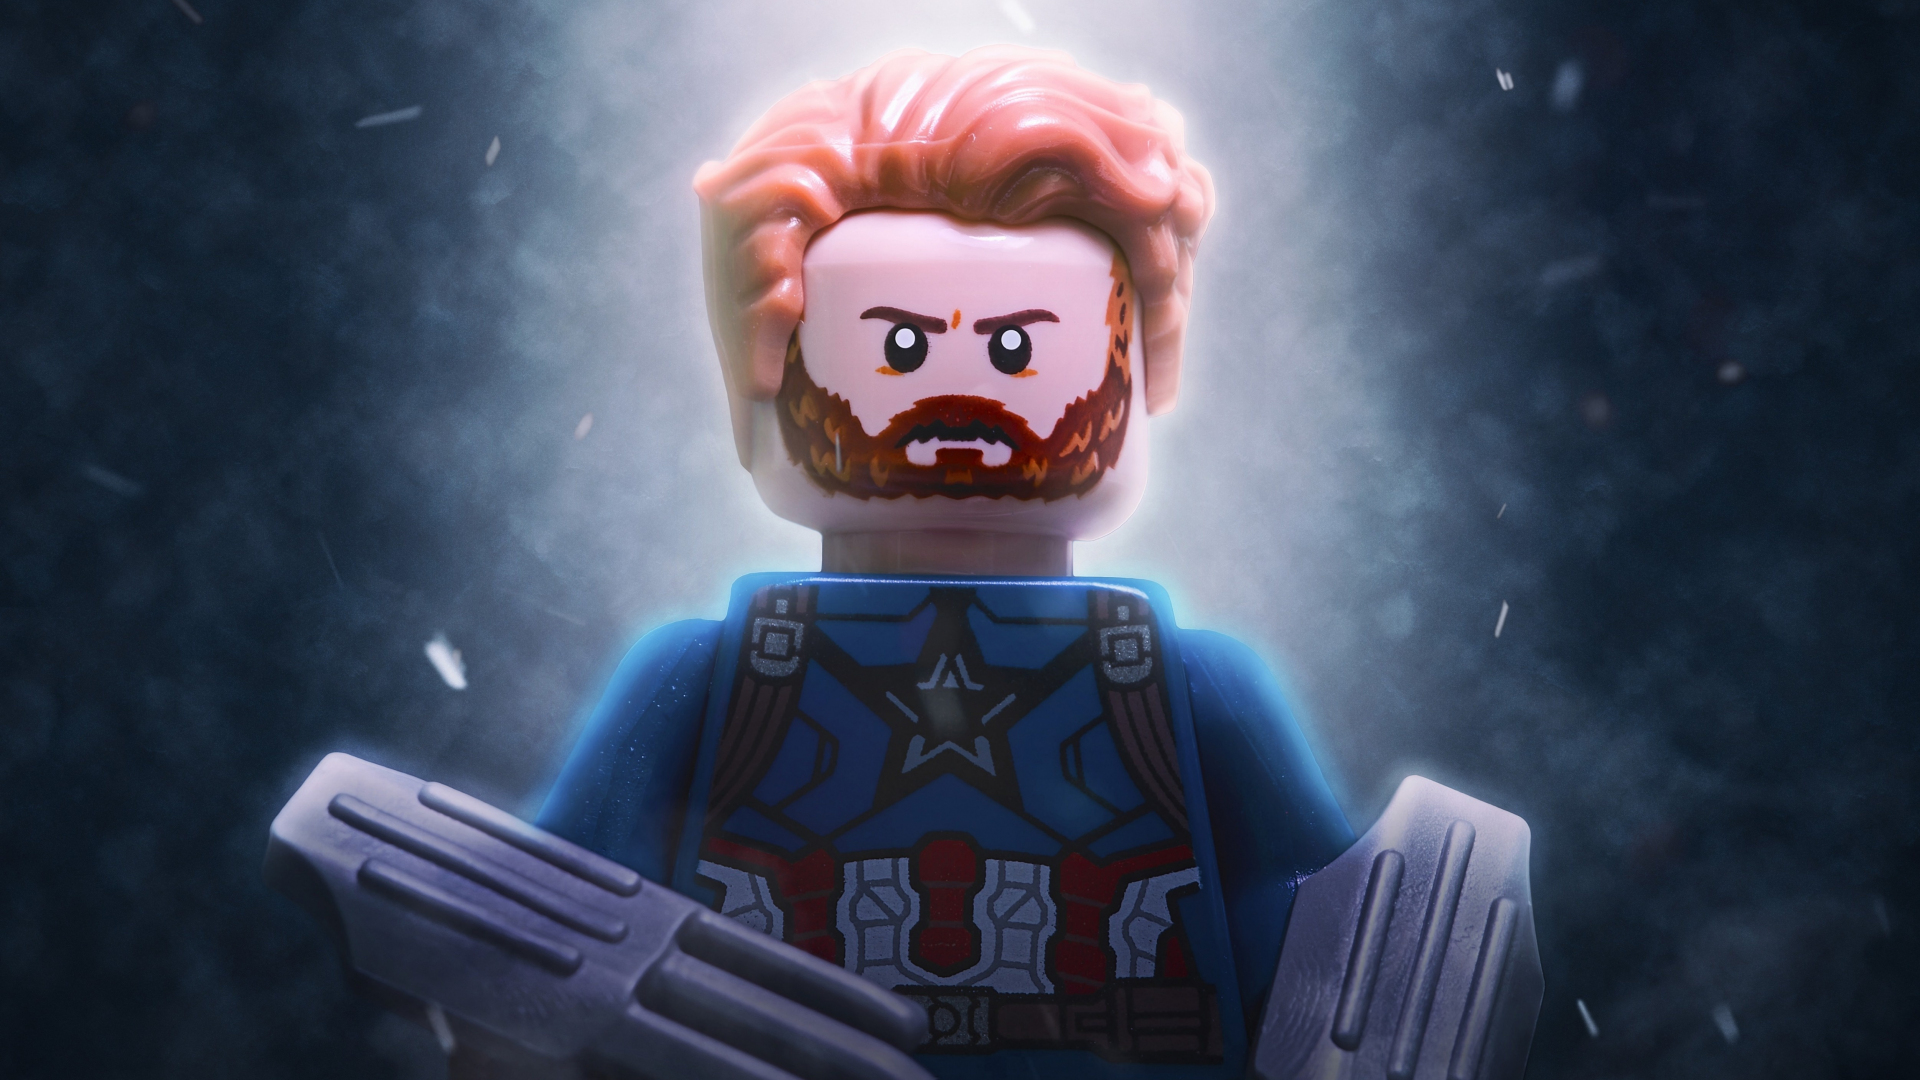 Download 1920x1080 Wallpaper Captain America Lego Toy